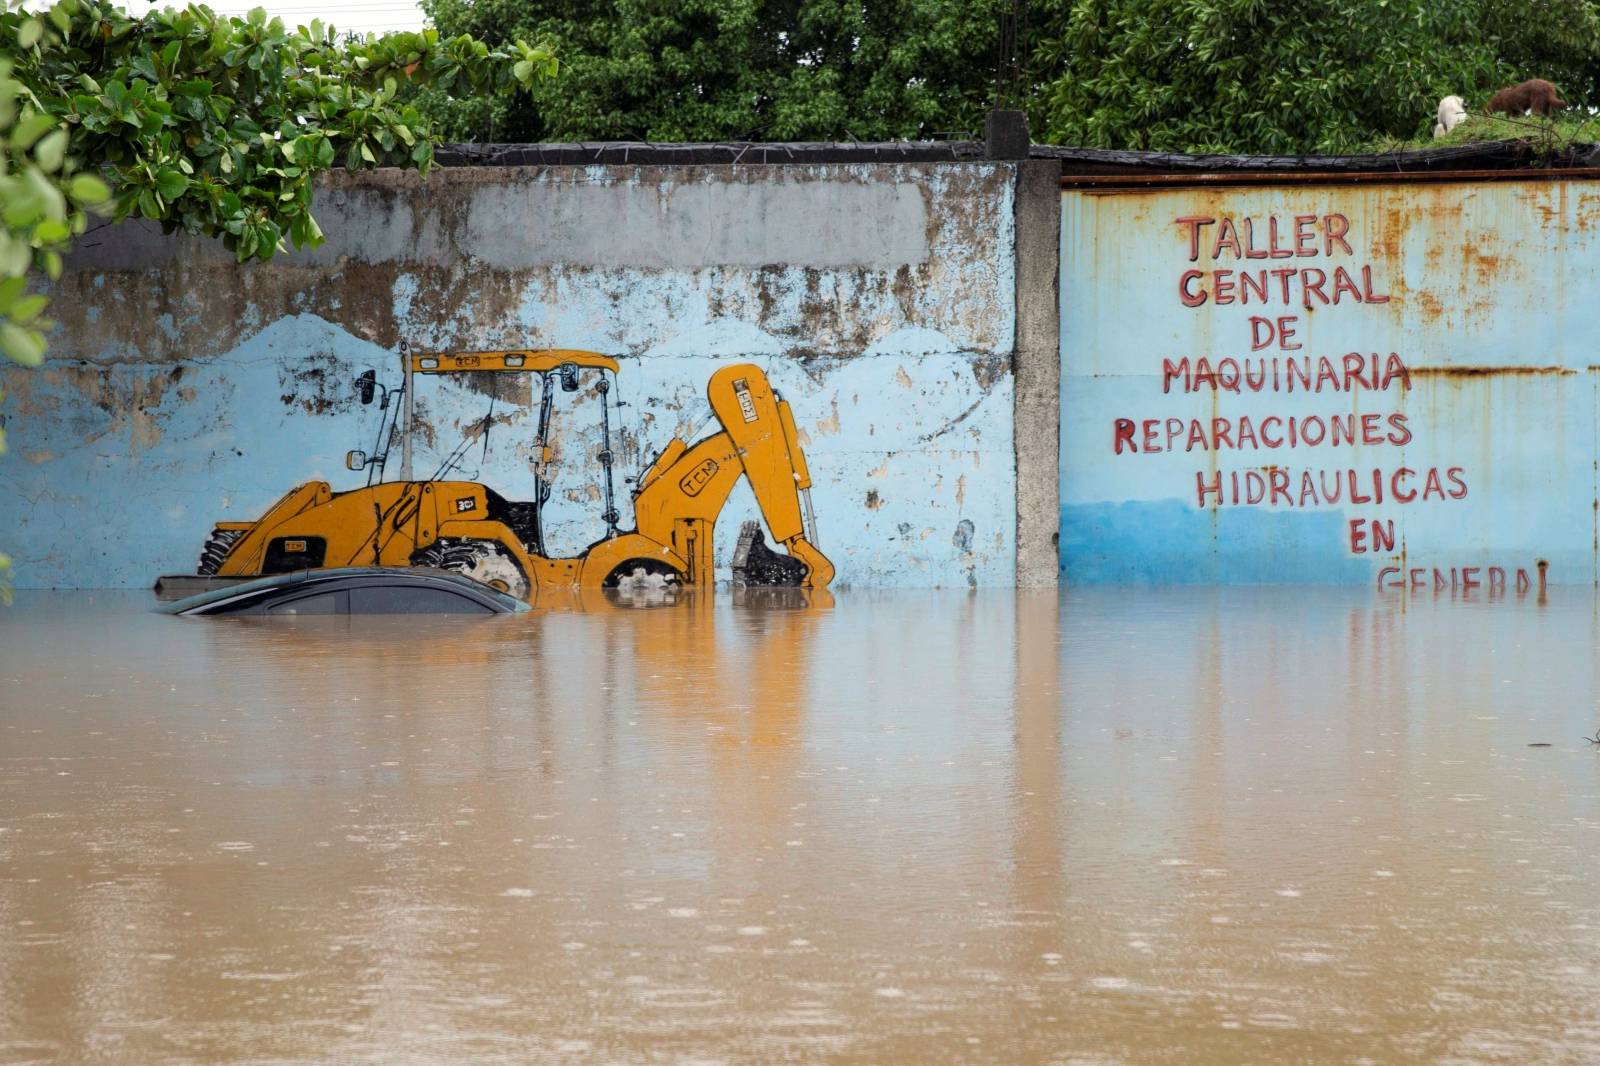 Submerged car is pictured outside a garage at an area flooded by Chamelecon river after the passing of Storm Iota, in La Lima